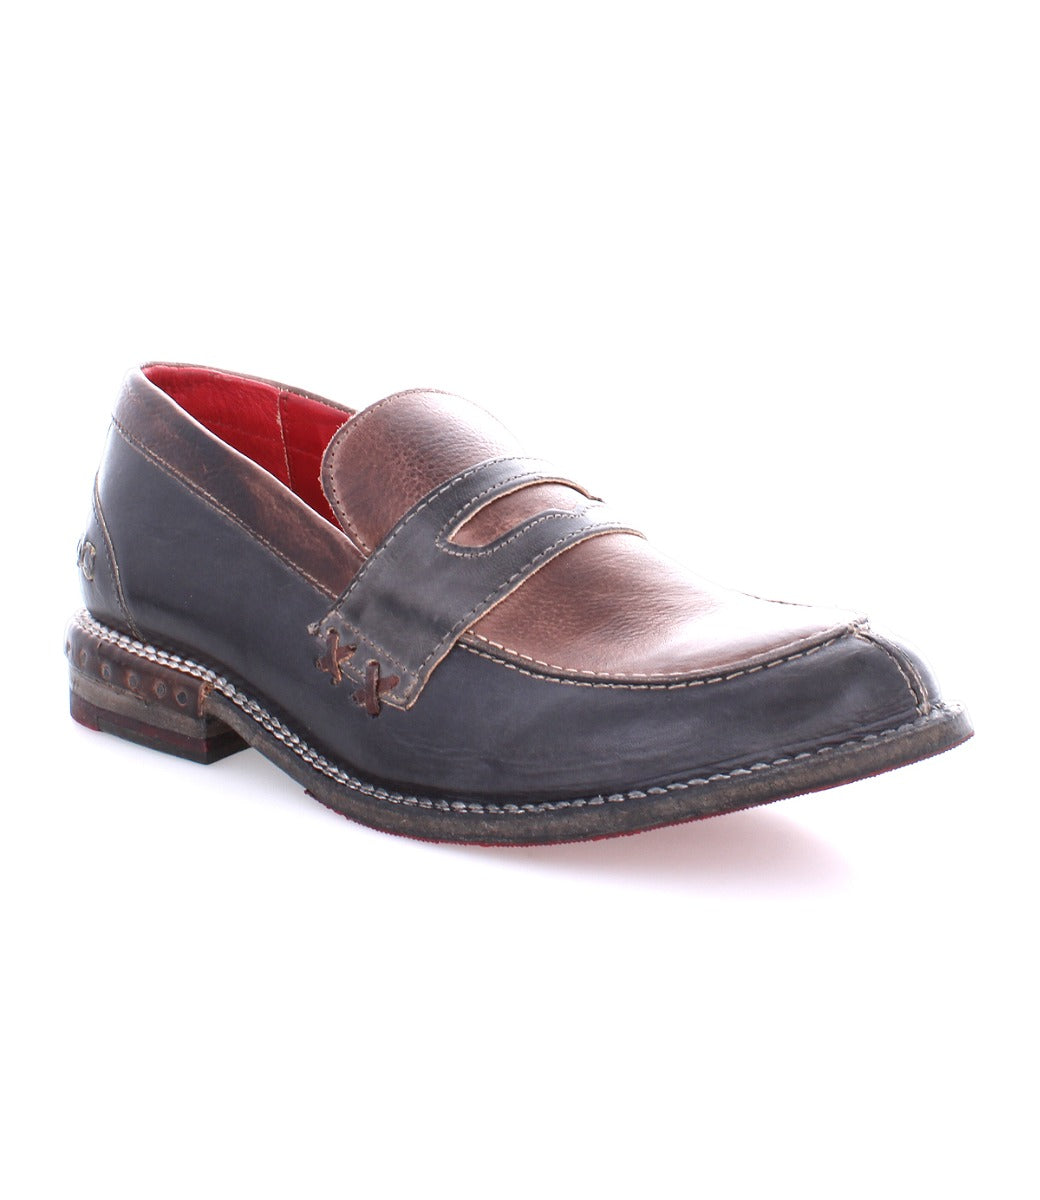 A Bed Stu women's loafer with a brown and red stripe named Reina.